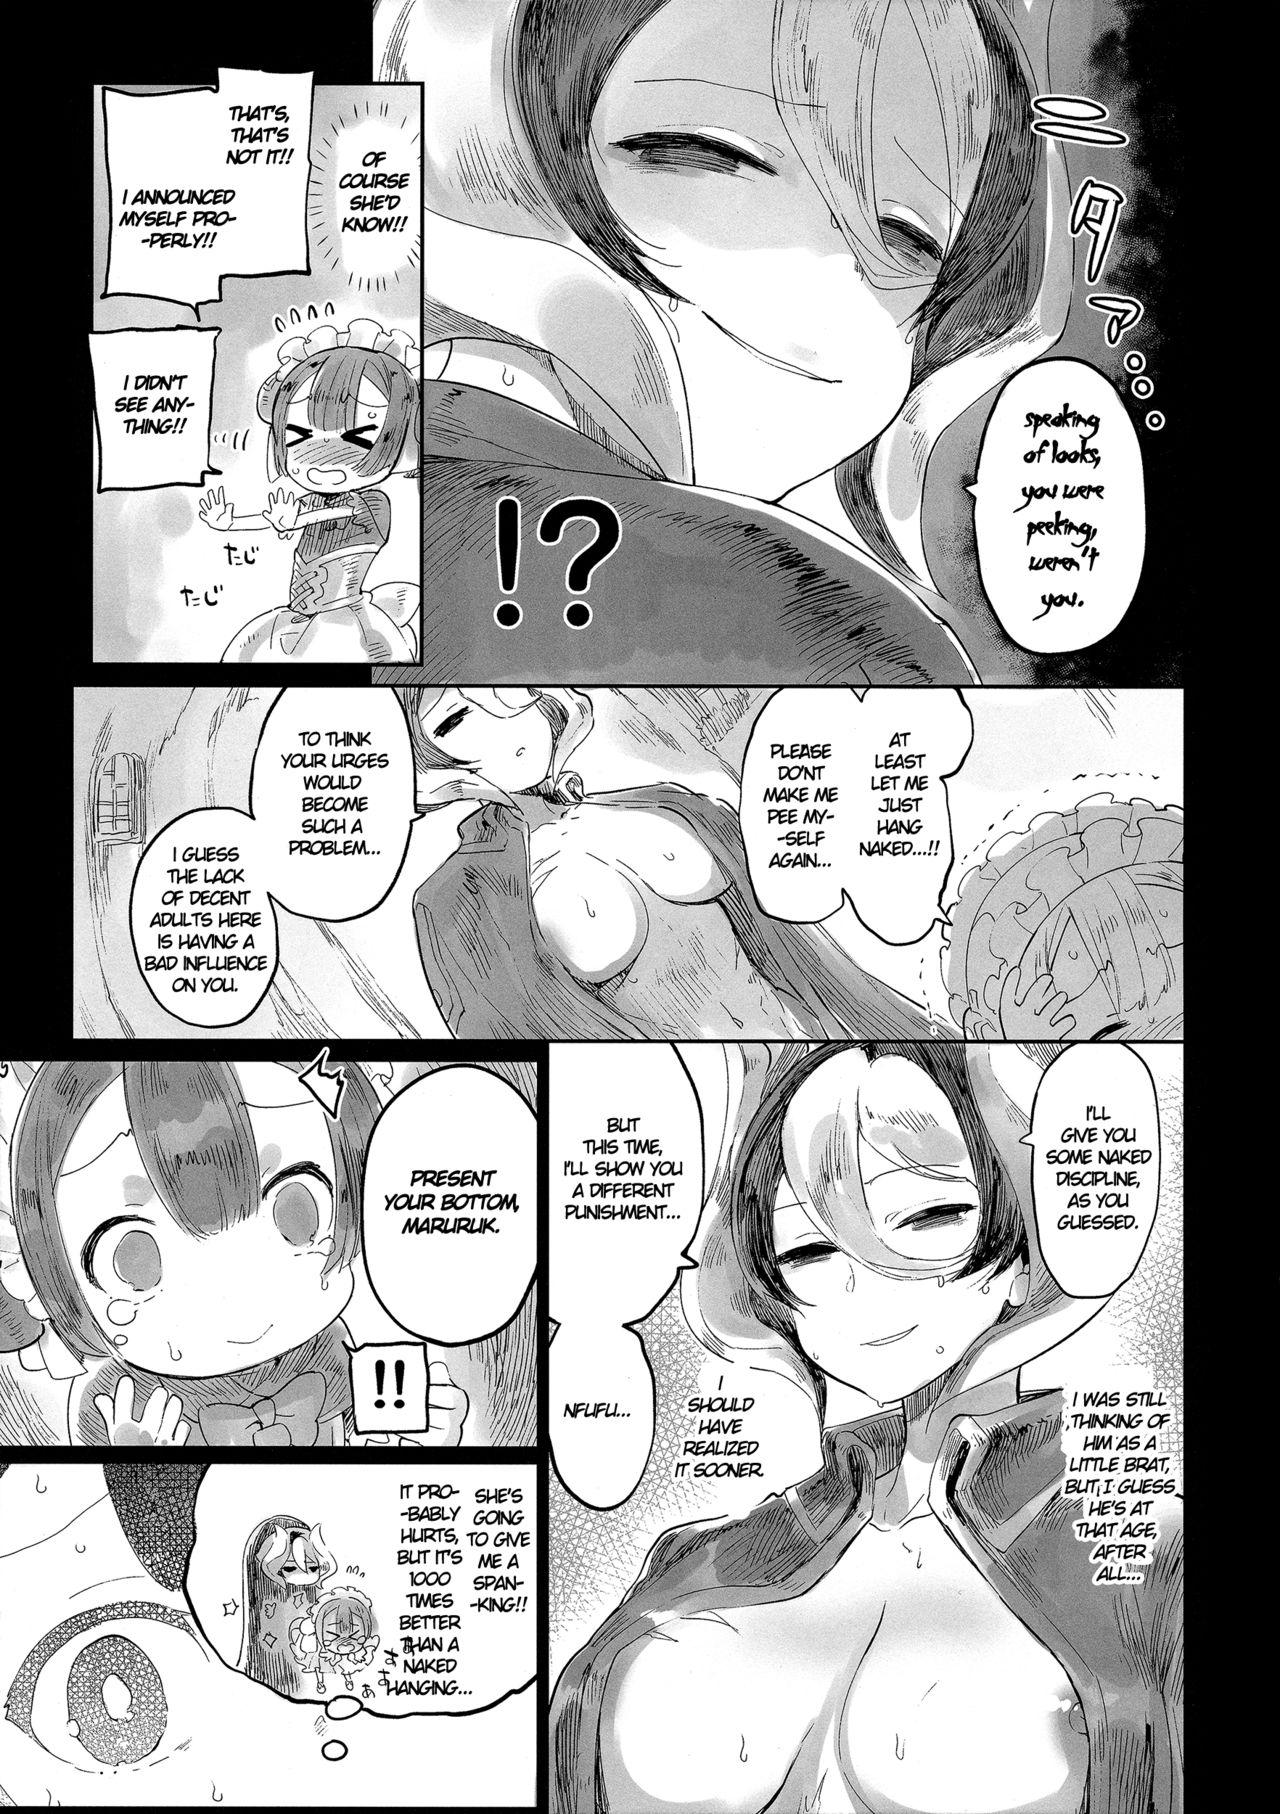 Transex Doshigatai Shitei | Irredeemable Master and Disciple - Made in abyss Female Domination - Page 12